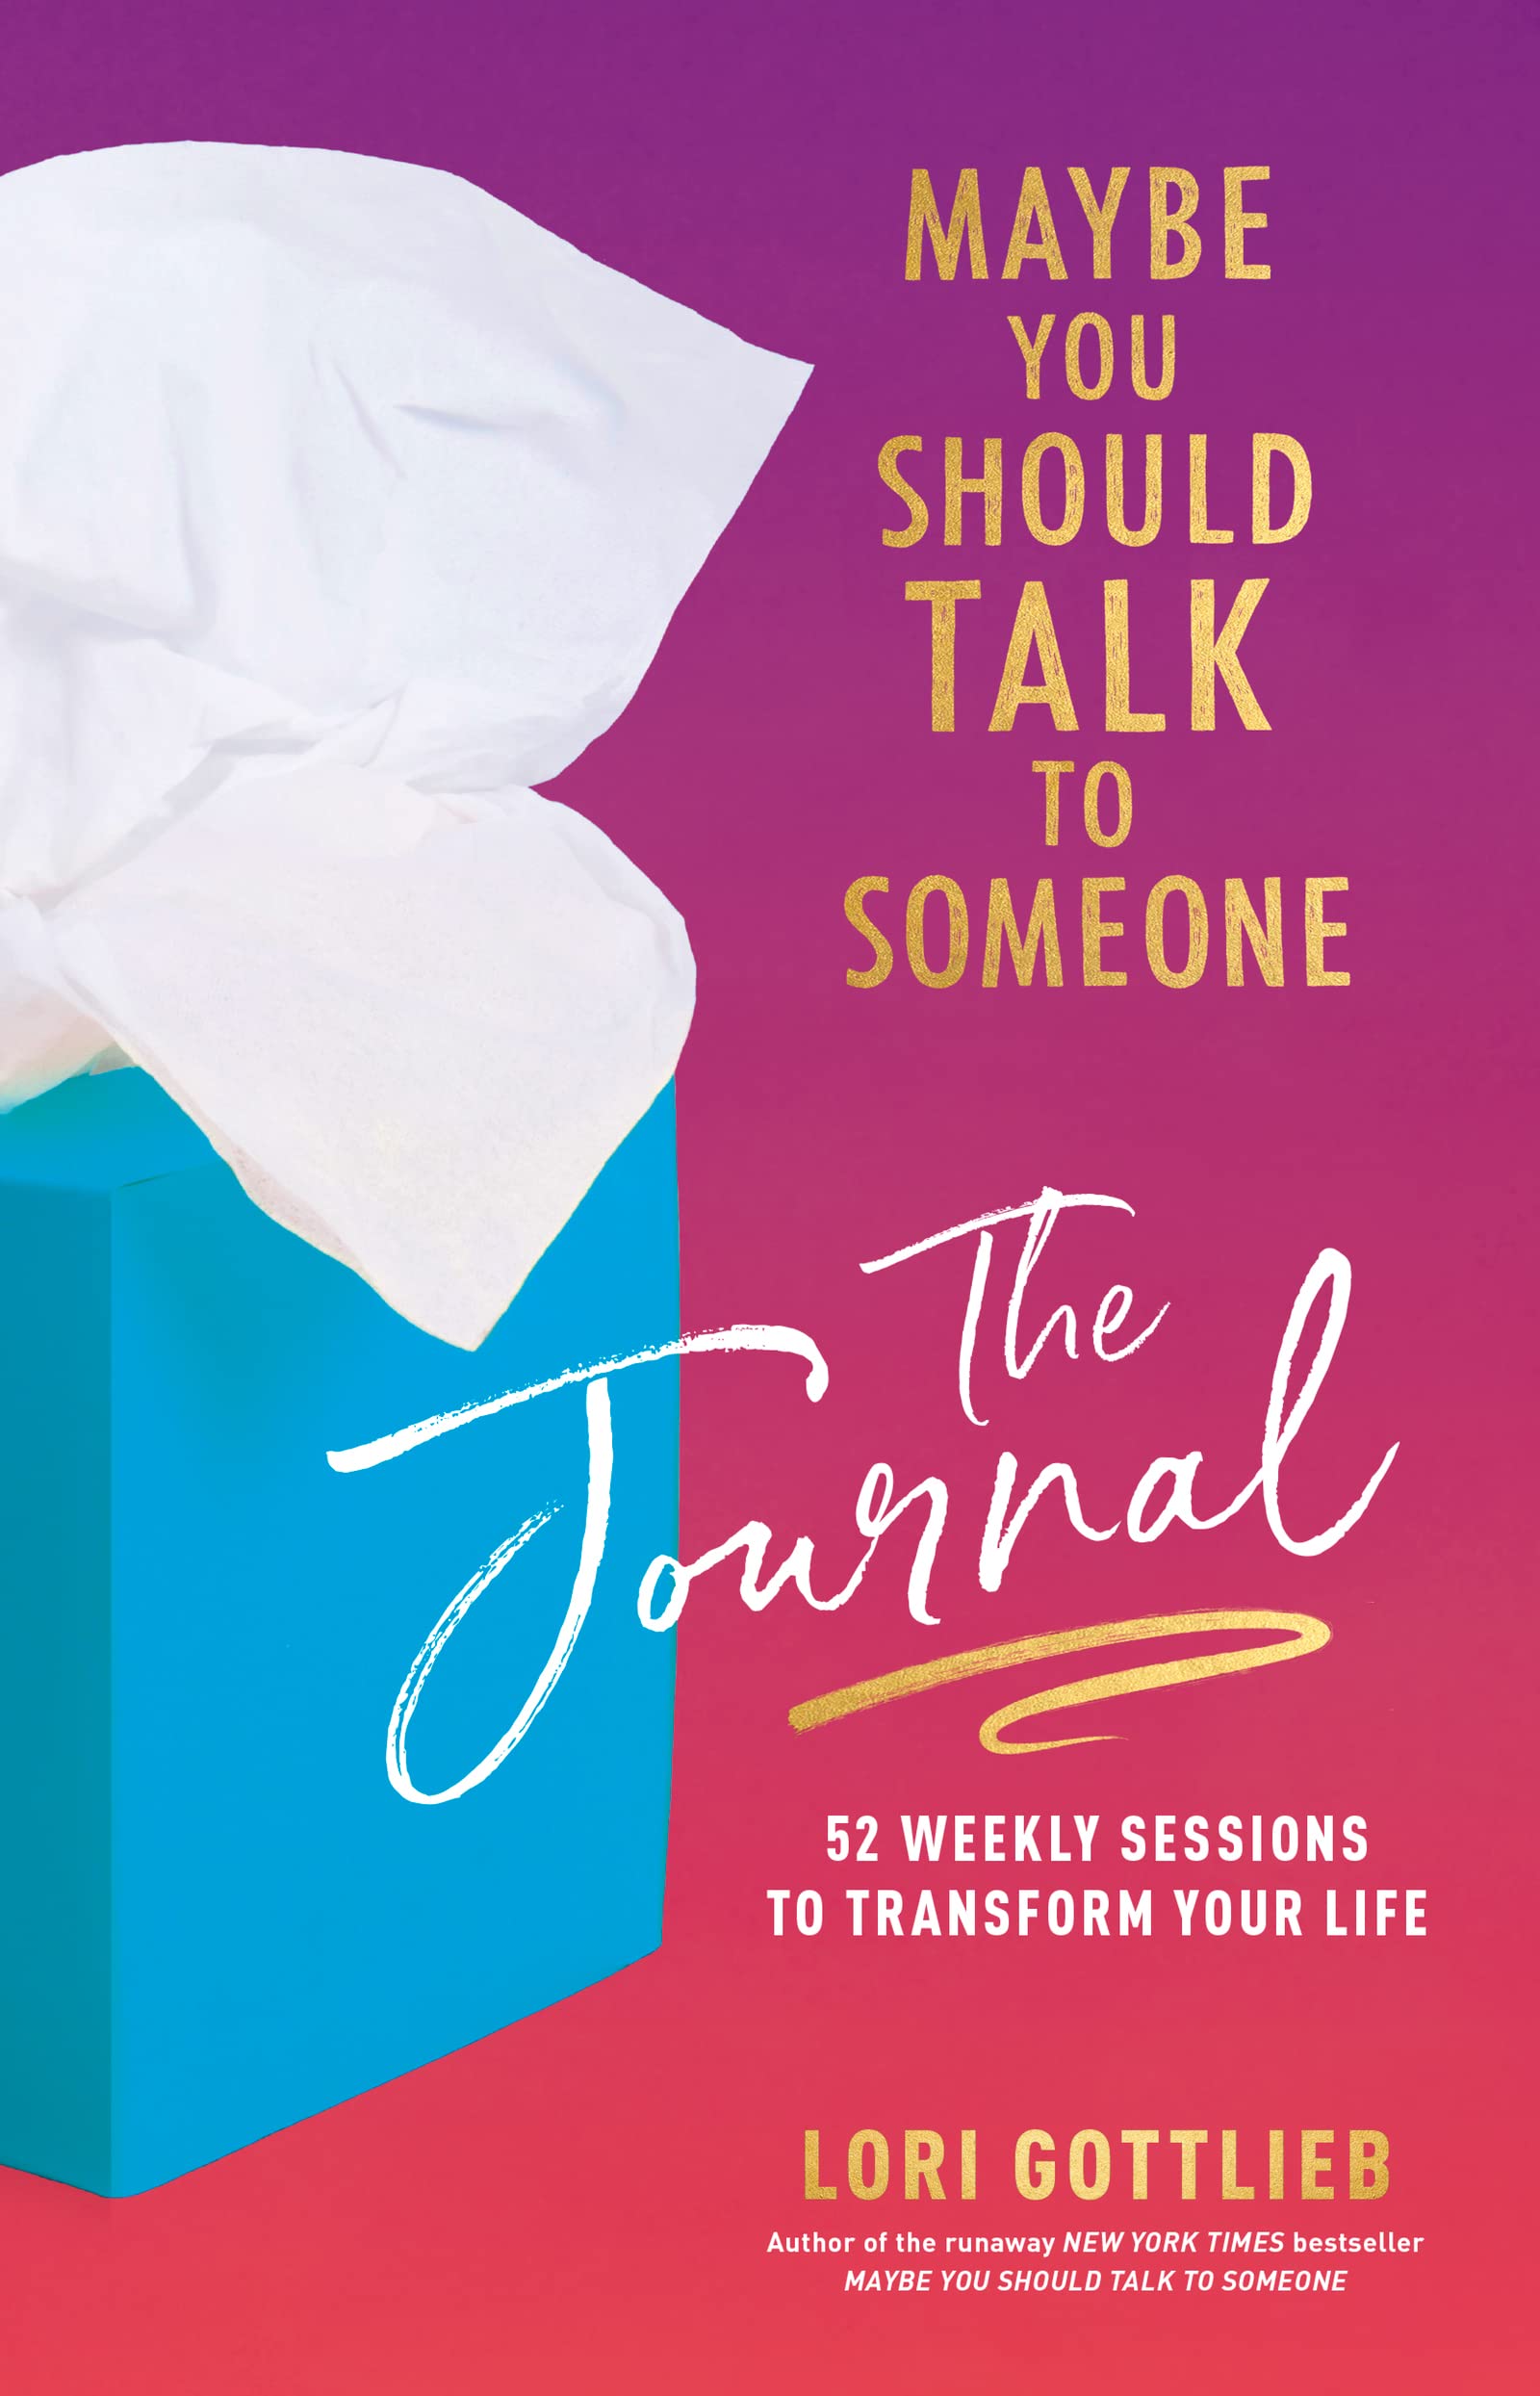 Maybe You Should Talk to Someone: The Journal